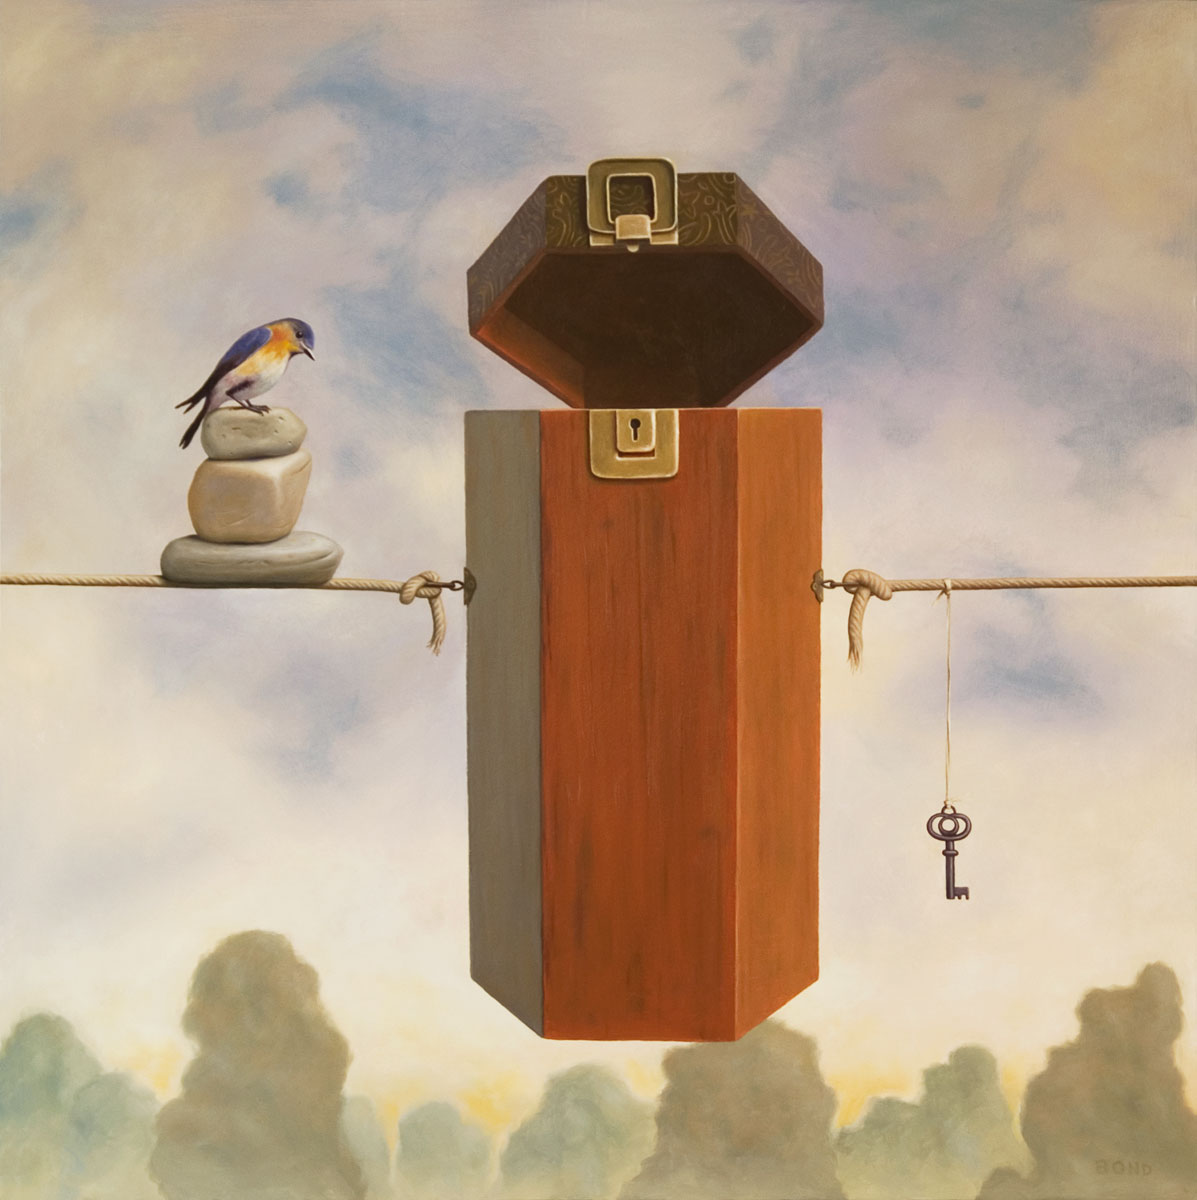 Clairvoyance, painting of a wooden box strung in the air with rope with a bird on stacked stones on one side and a key dangling on the other,cairn, zen, bird, rocks, key, balance, balance, cairn, stones, psychic, seek, trompe l'oeil, soulful uplifting inspirational art, soul stirring illusion art, romantic art,  surrealism, surreal art, dreamlike imagery, fanciful art, fantasy art, dreamscape visual, metaphysical art, spiritual painting, metaphysical painting, spiritual art, whimsical art, whimsy art, dream art, fantastic realism art, magic realism oil painting by Paul Bond